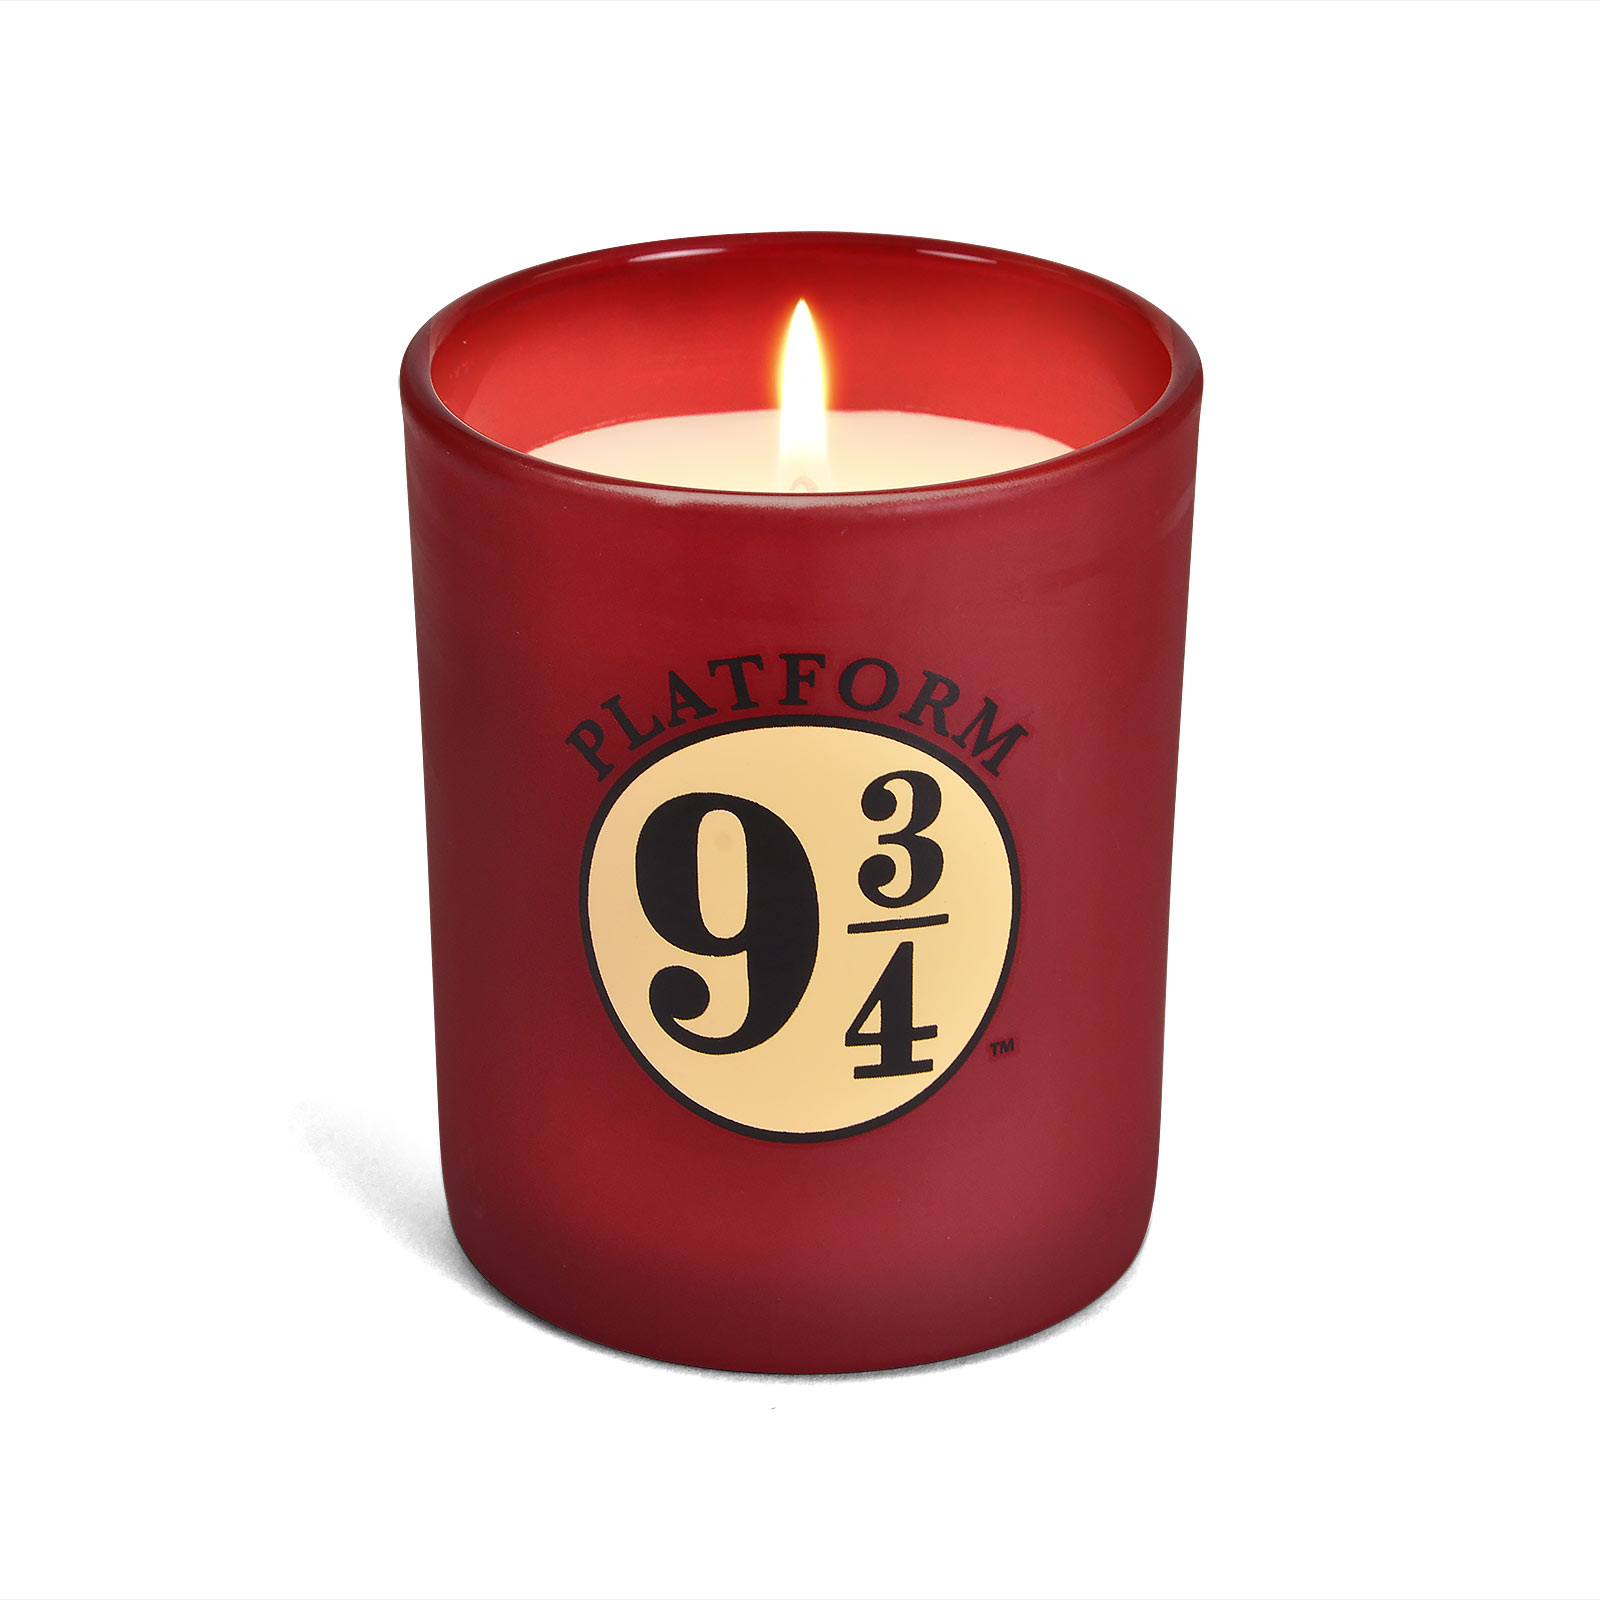 Harry Potter - Platform 9 3/4 Candle in Glass